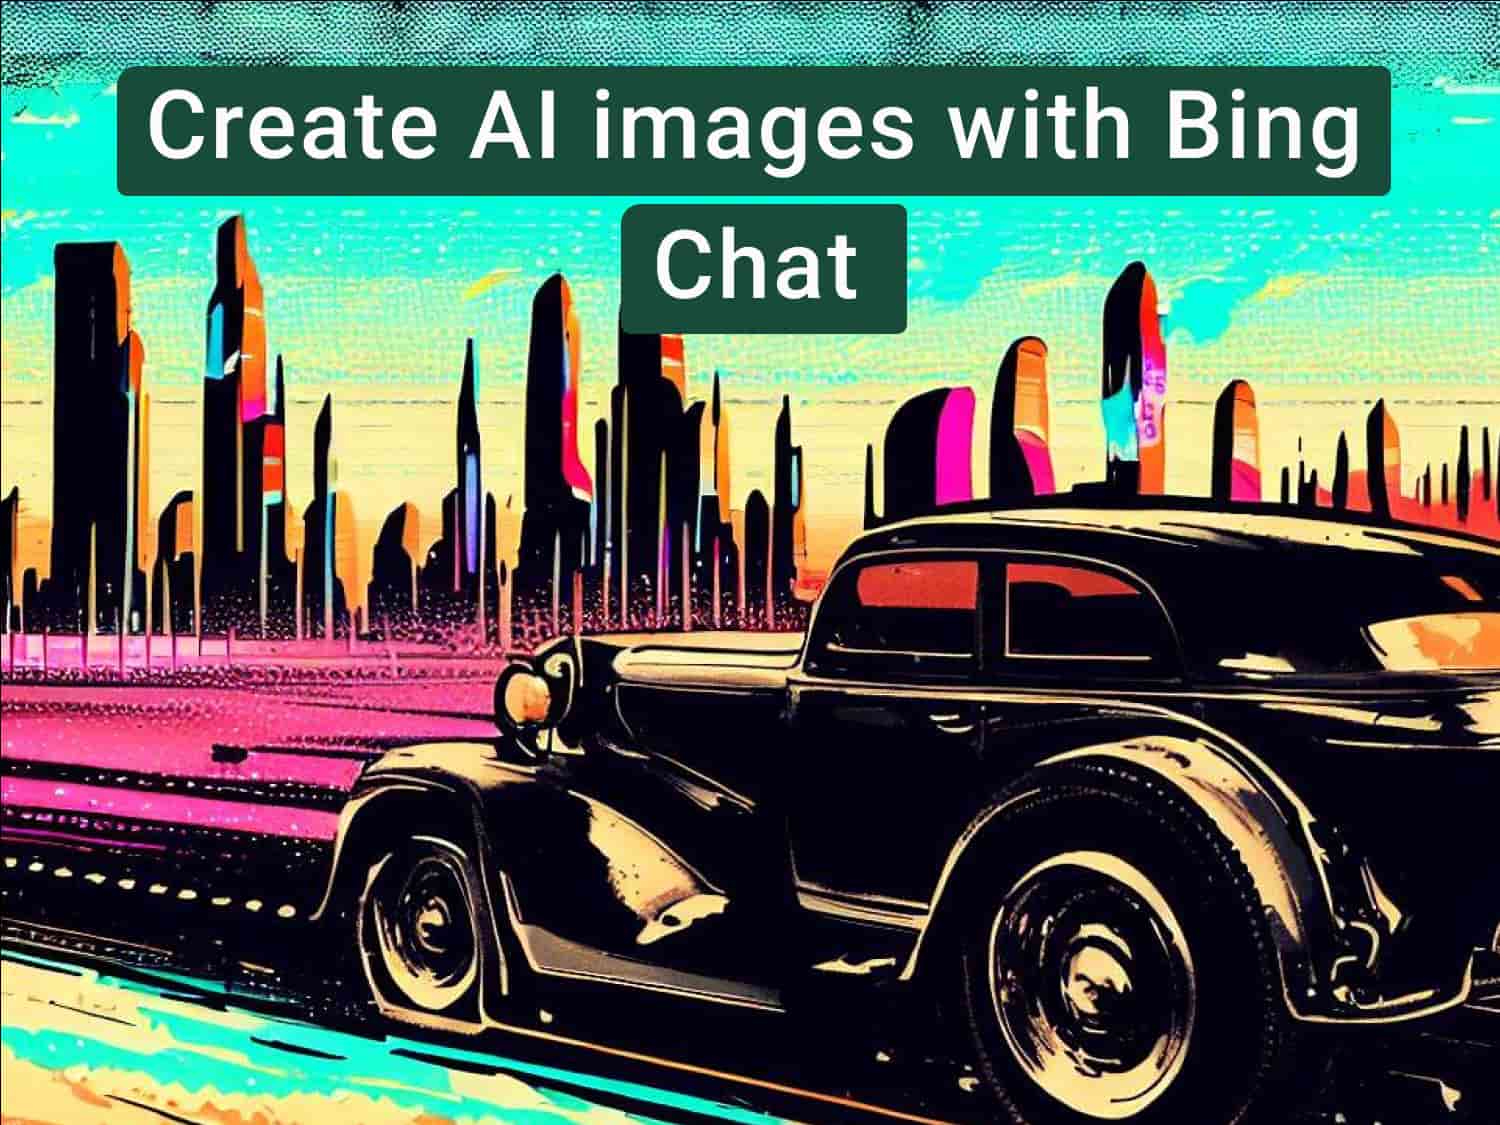 How to use Bing Chat to create images